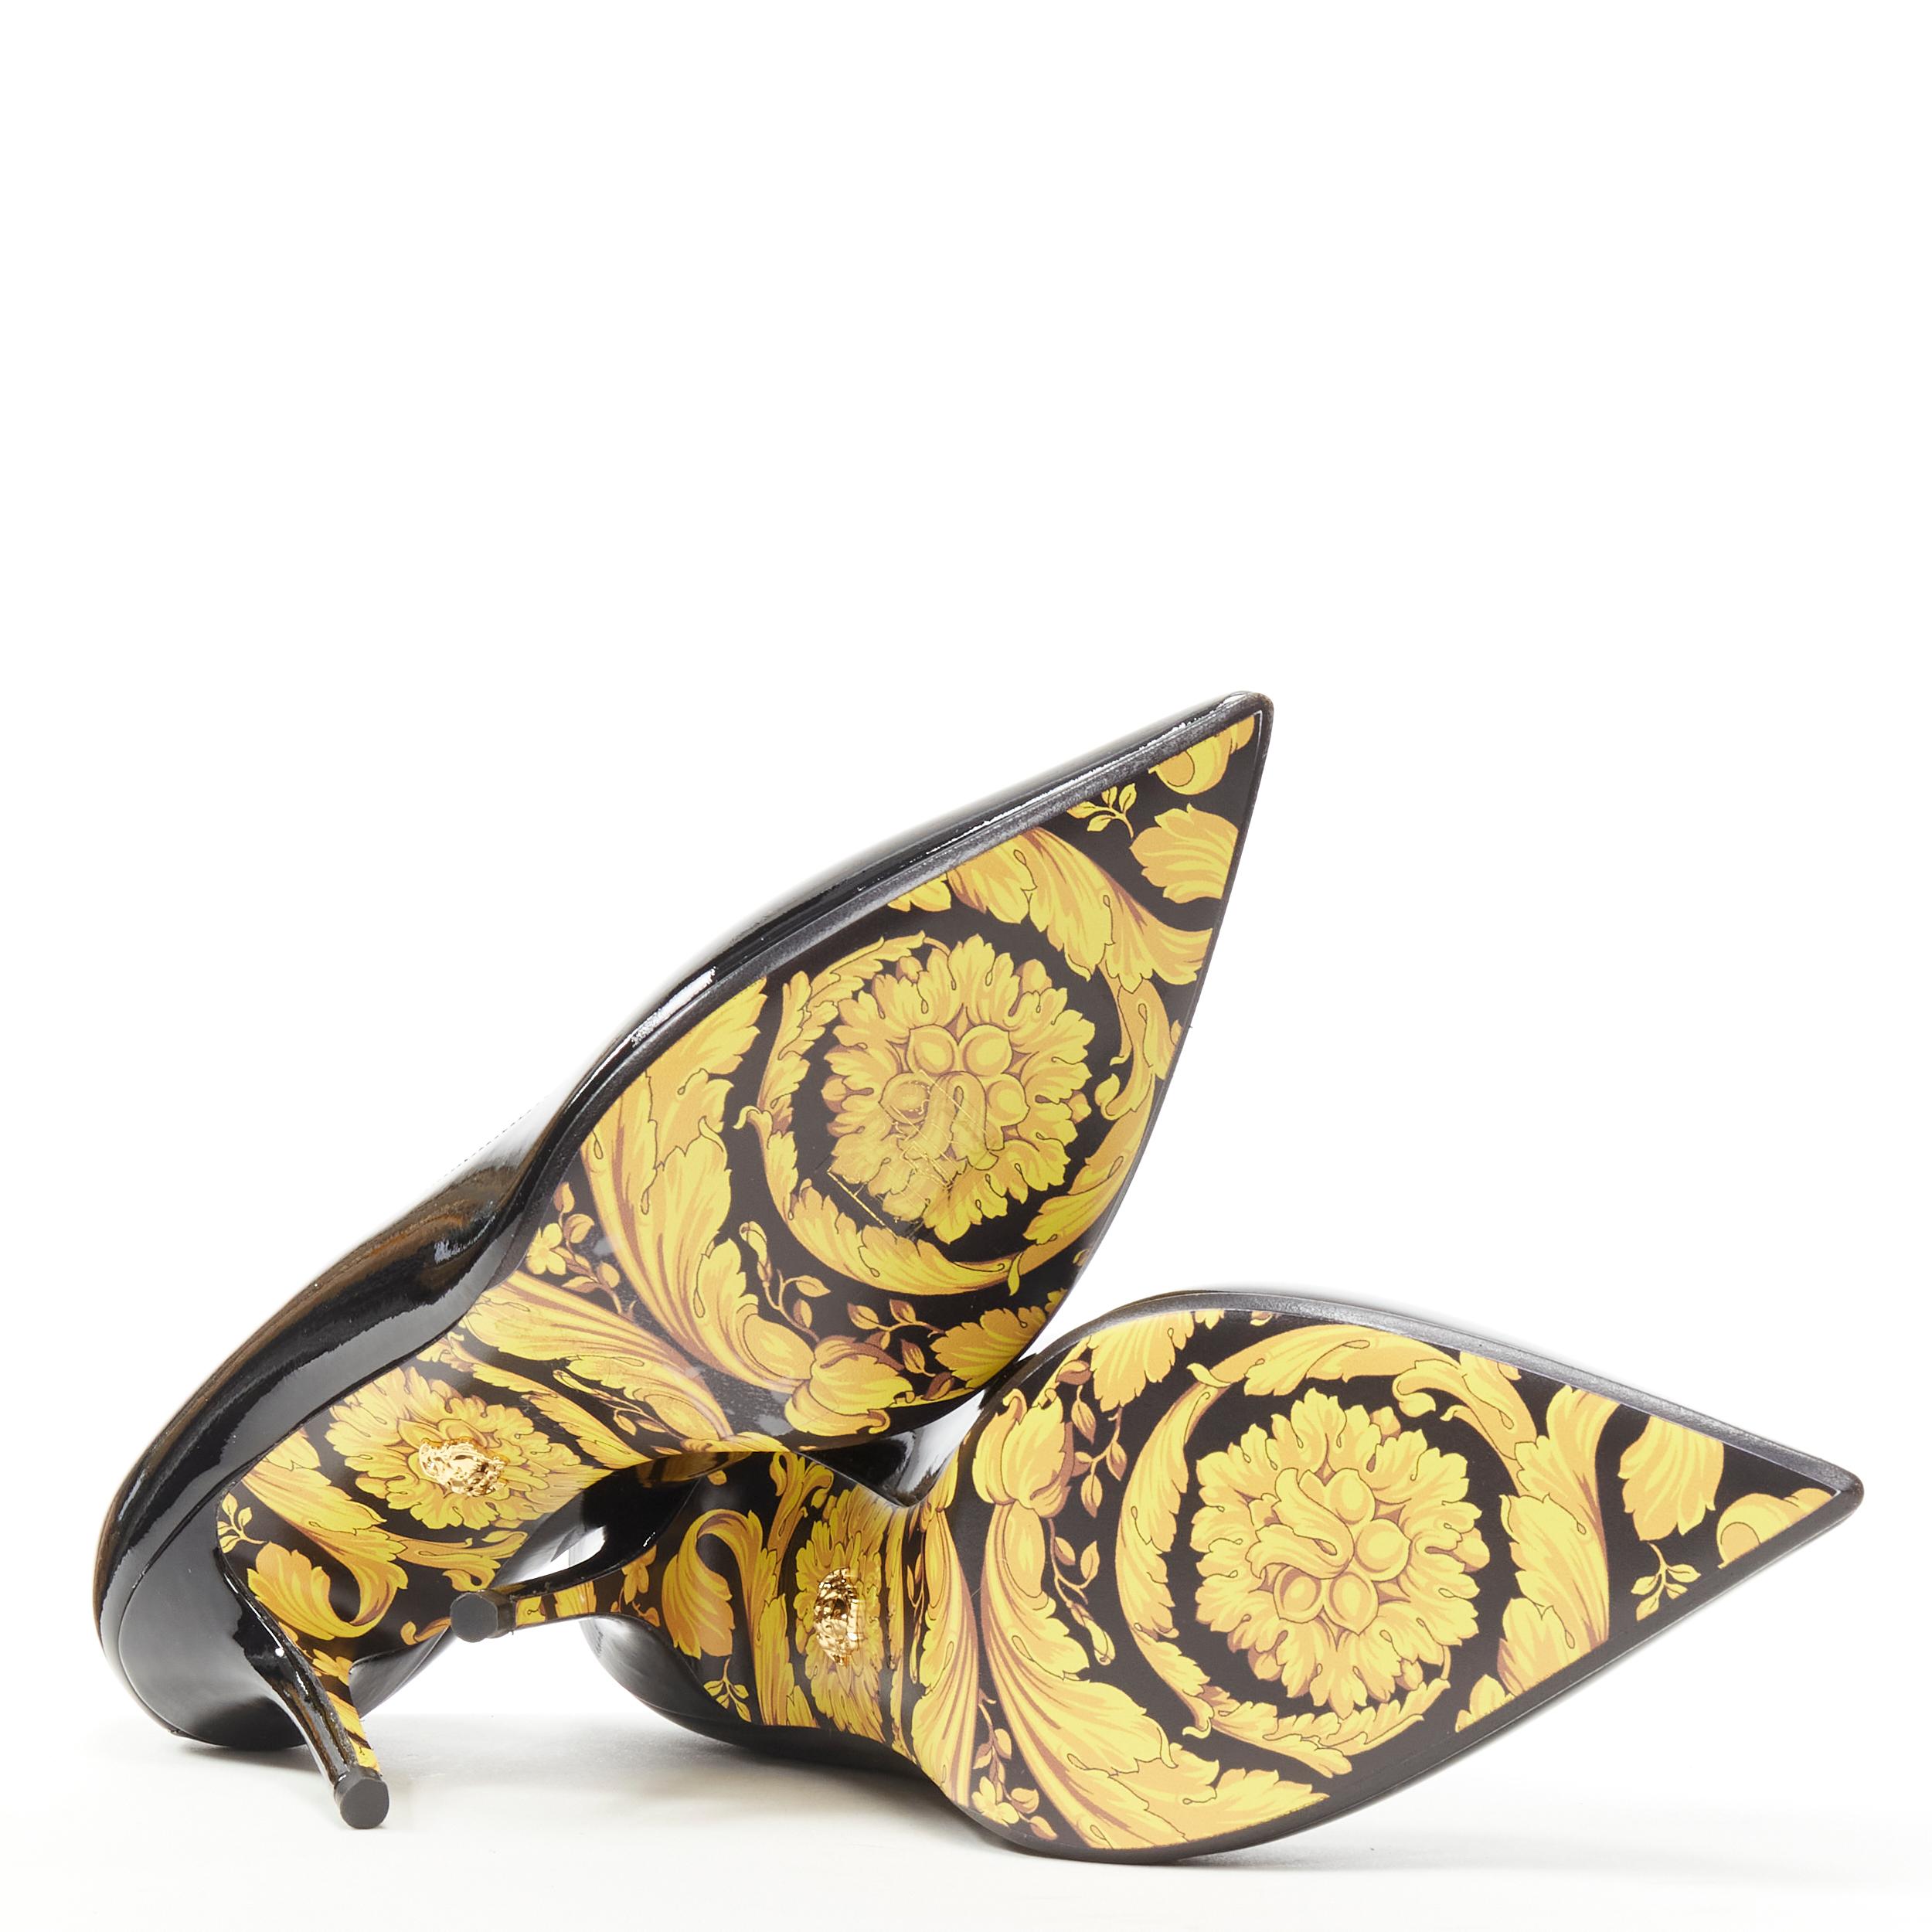 new VERSACE black patent leather gold Medusa stud Barocco print sole pump EU37.5 
Reference: TGAS/C00073 
Brand: Versace 
Designer: Donatella Versace 
Material: Patent Leather 
Color: Black 
Extra Detail: Gold-tone Medusa stud at heel. All-over